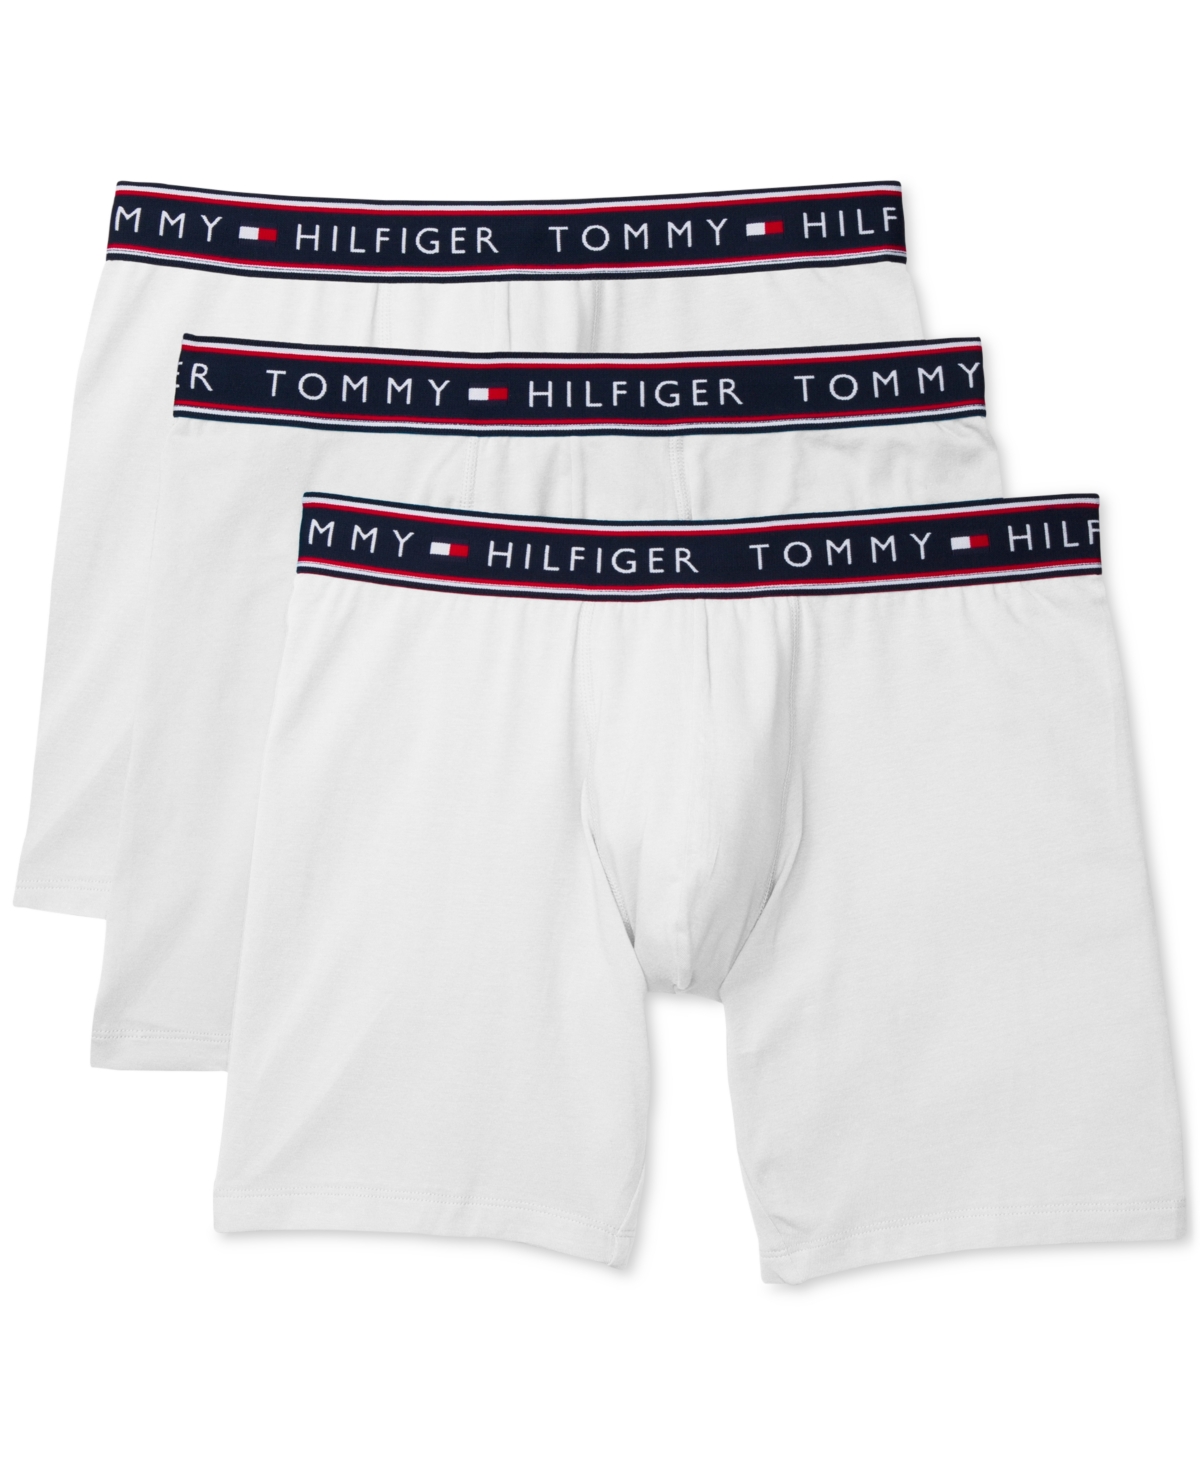 UPC 088541539326 product image for Tommy Hilfiger Men's Cotton Stretch Boxer Brief, 3 Pack | upcitemdb.com